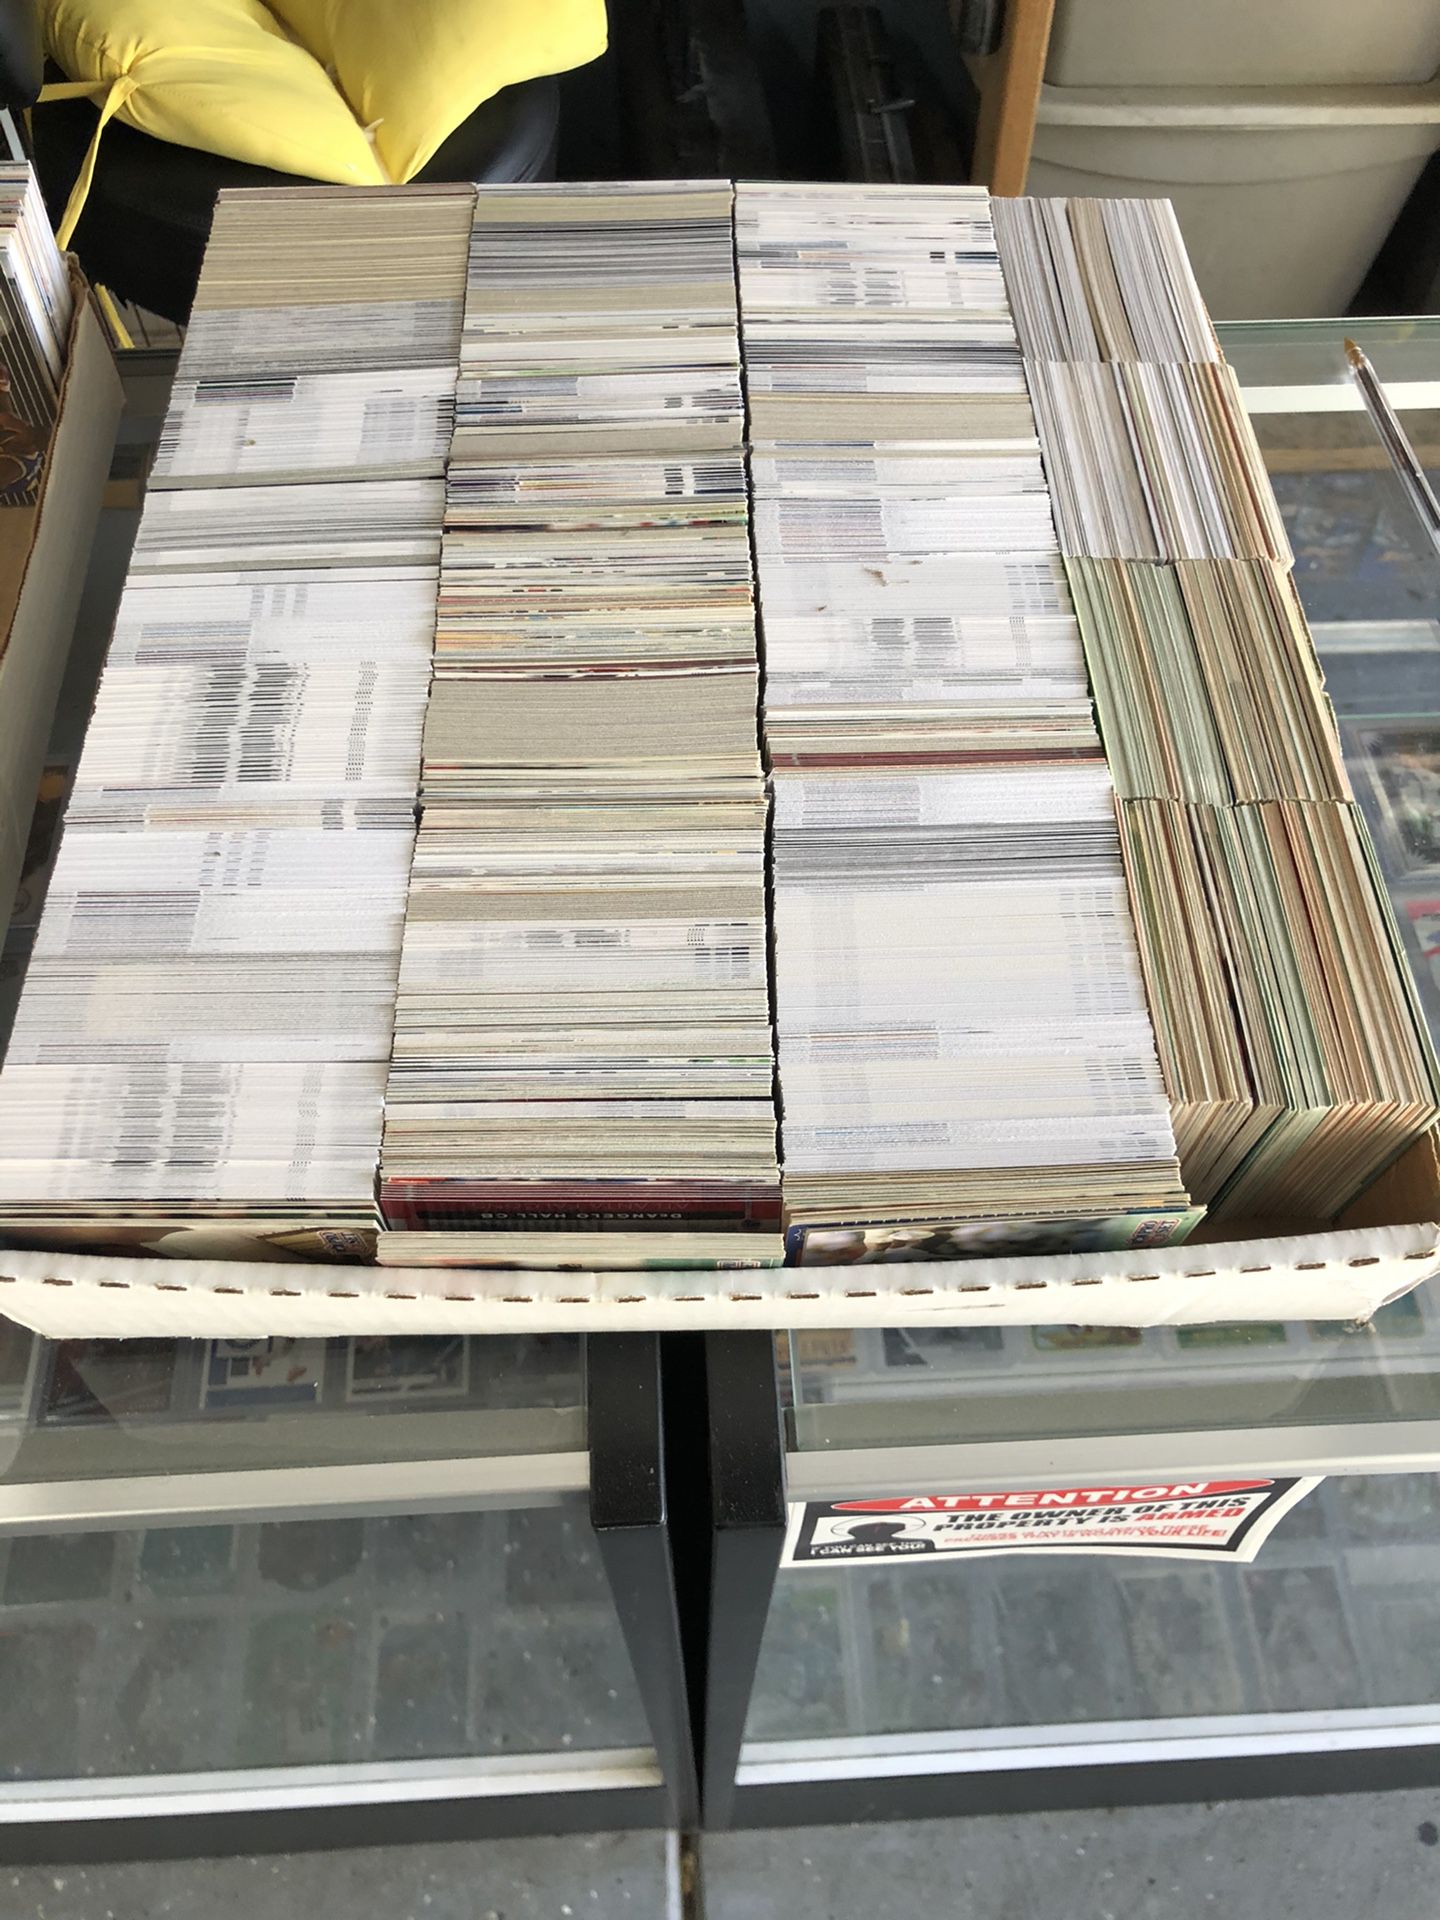 3200 card box of assorted NFL football cards early 80s-present. Loaded with stars. Come take a look if you want before you buy.